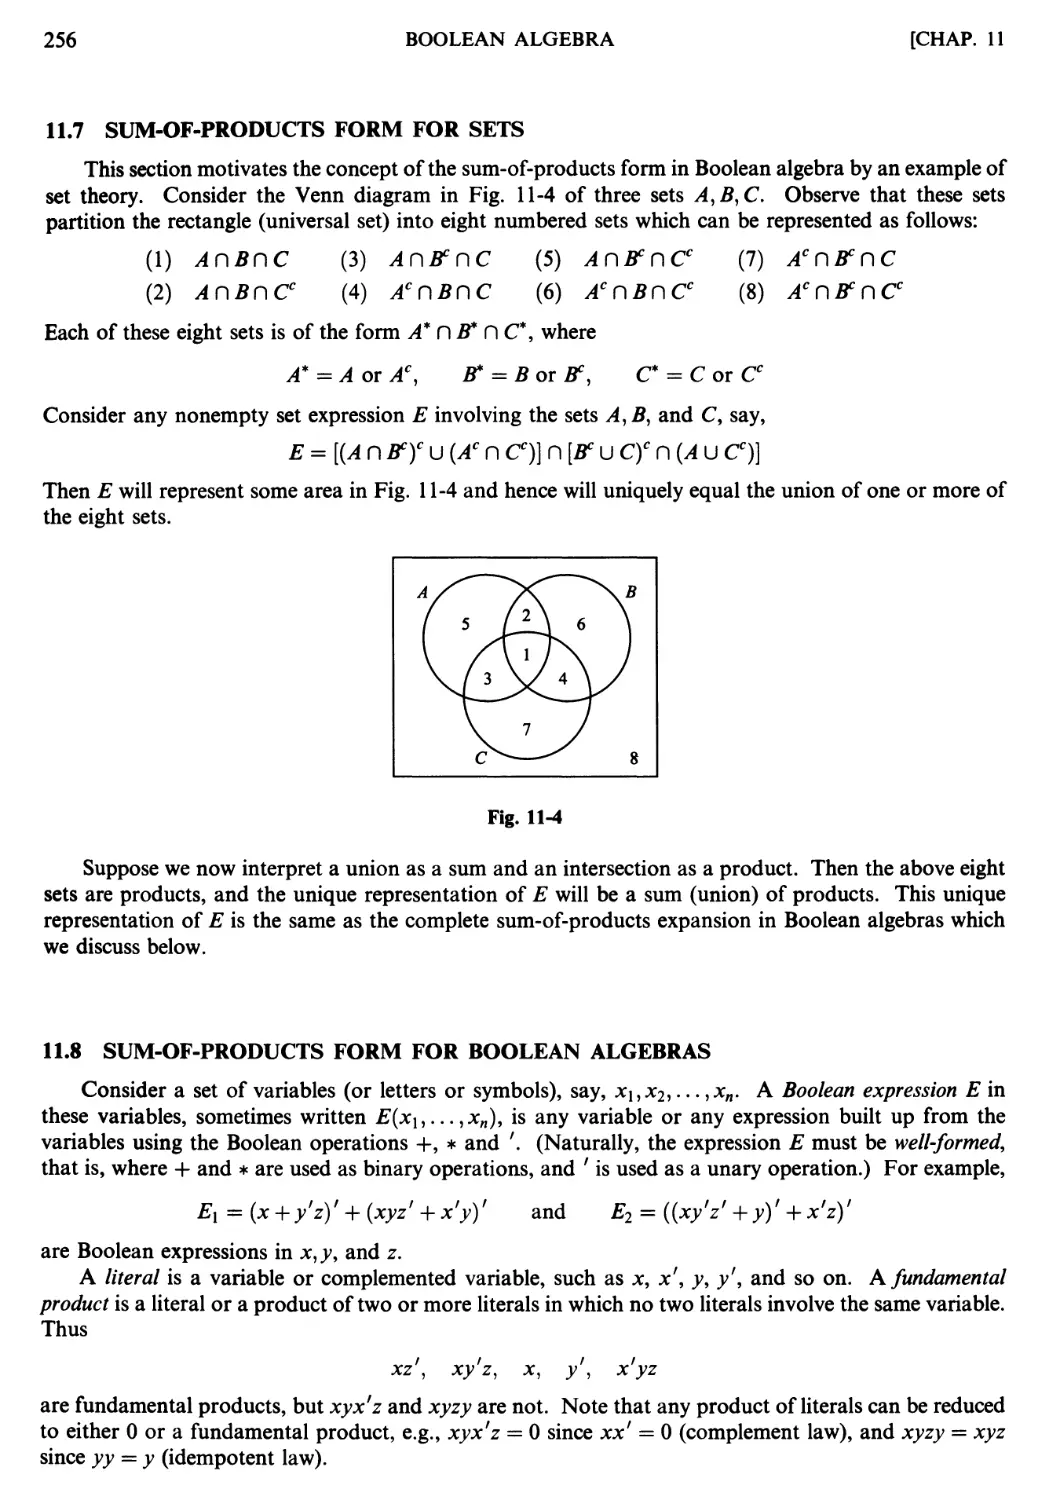 11.7 Sum-of-products form for sets
11.8 Sum-of-products form for boolean algebras